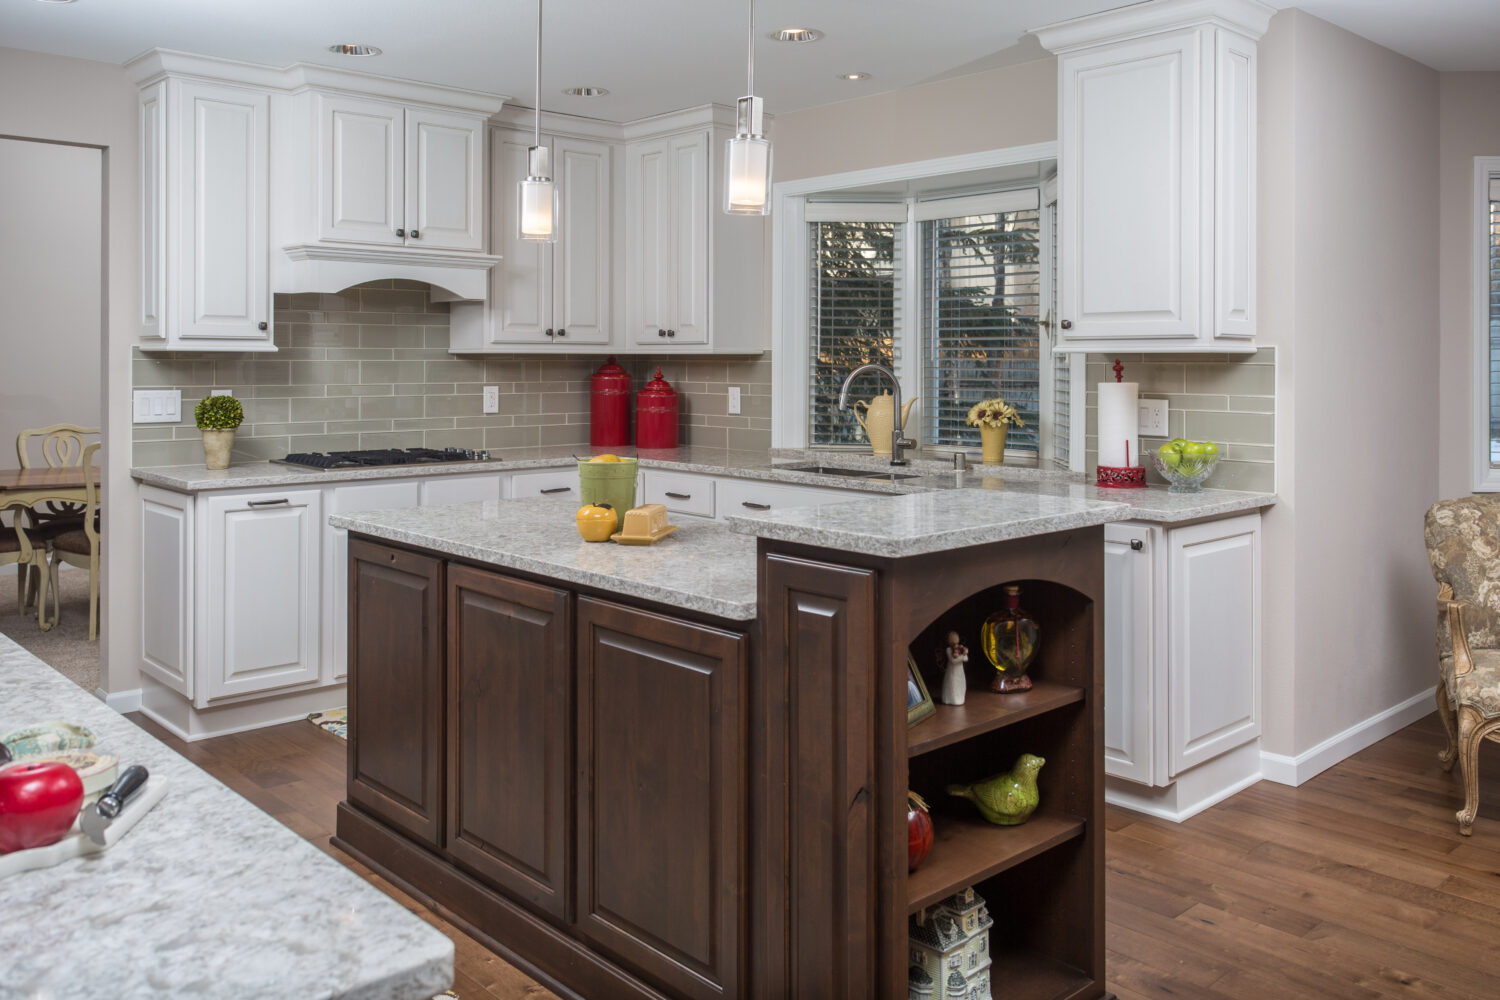 This classic two-tone kitchen remodel uses traditional overlay cabinet doors with raised panel styles. The 2-level kitchen island has a dark stained wood finish while the perimeter cabinets are painted bright white.